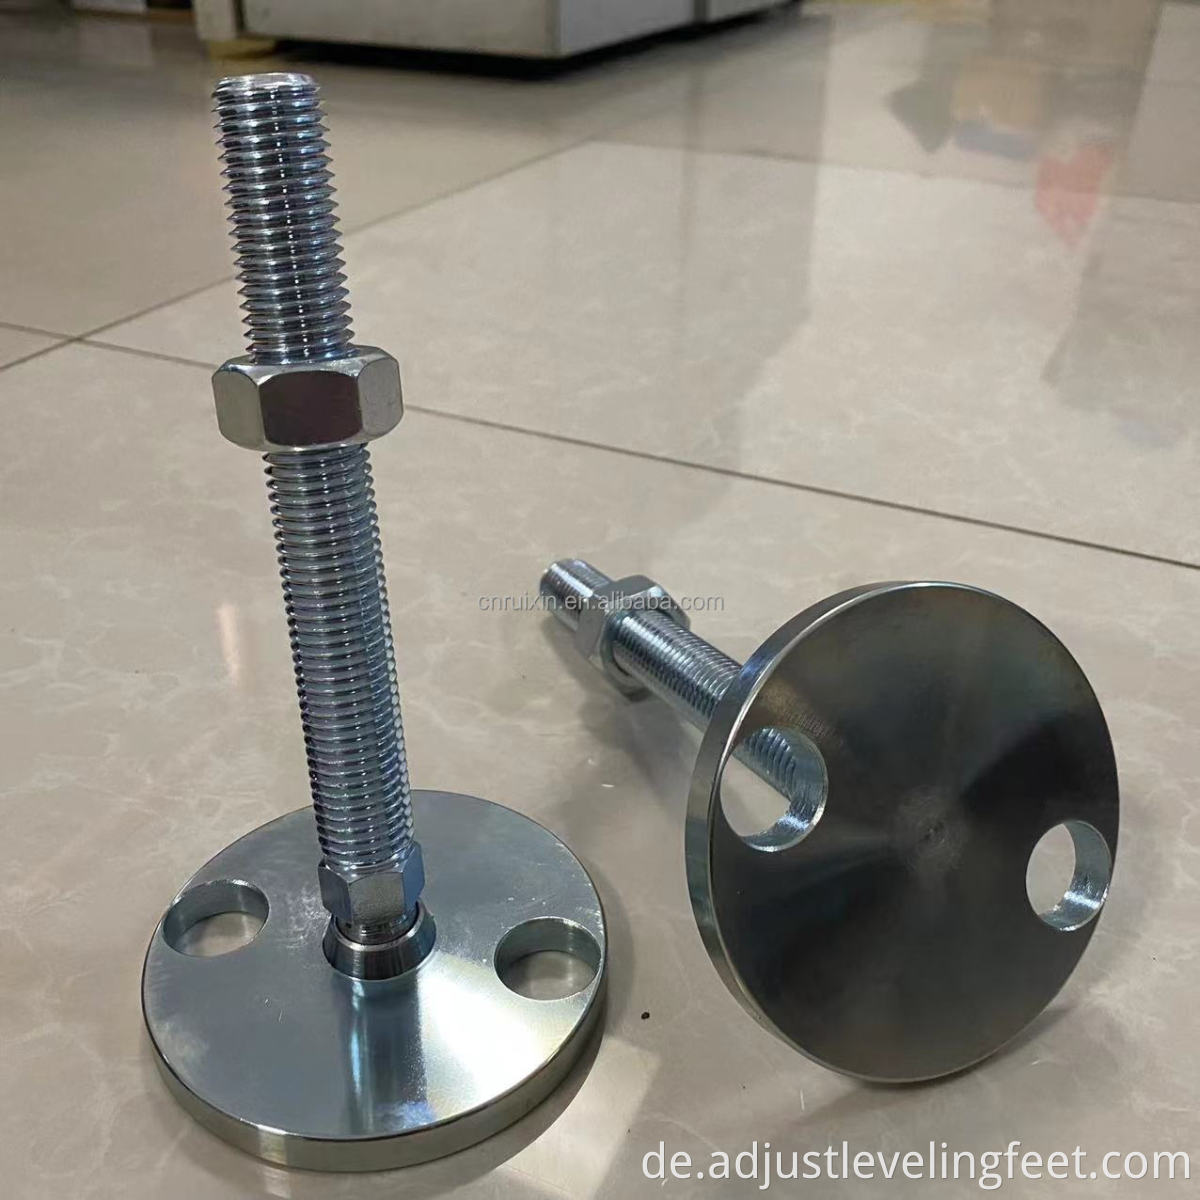 Adjustable Foot with dia 100/150 mm base